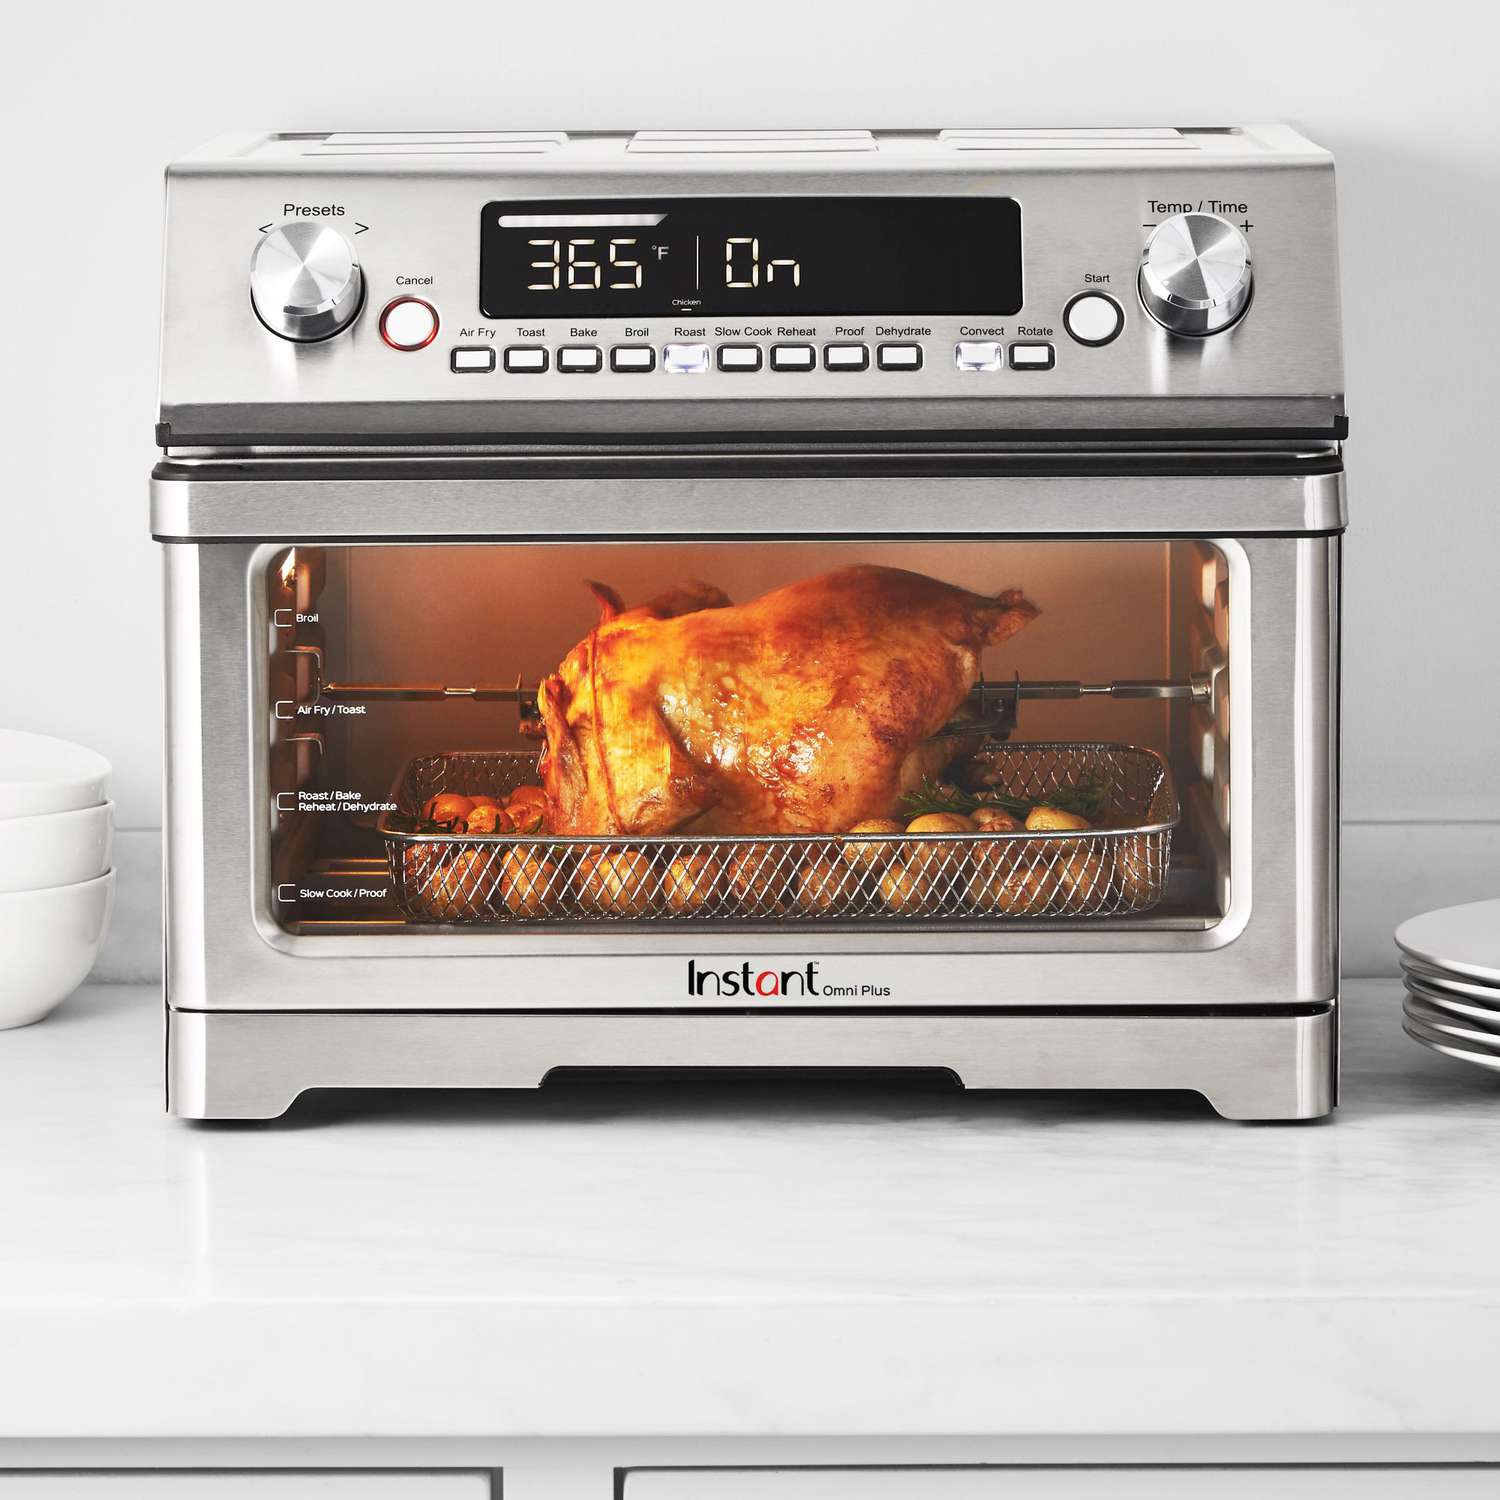 Instant Stainless-Steel Omni Plus Toaster Oven